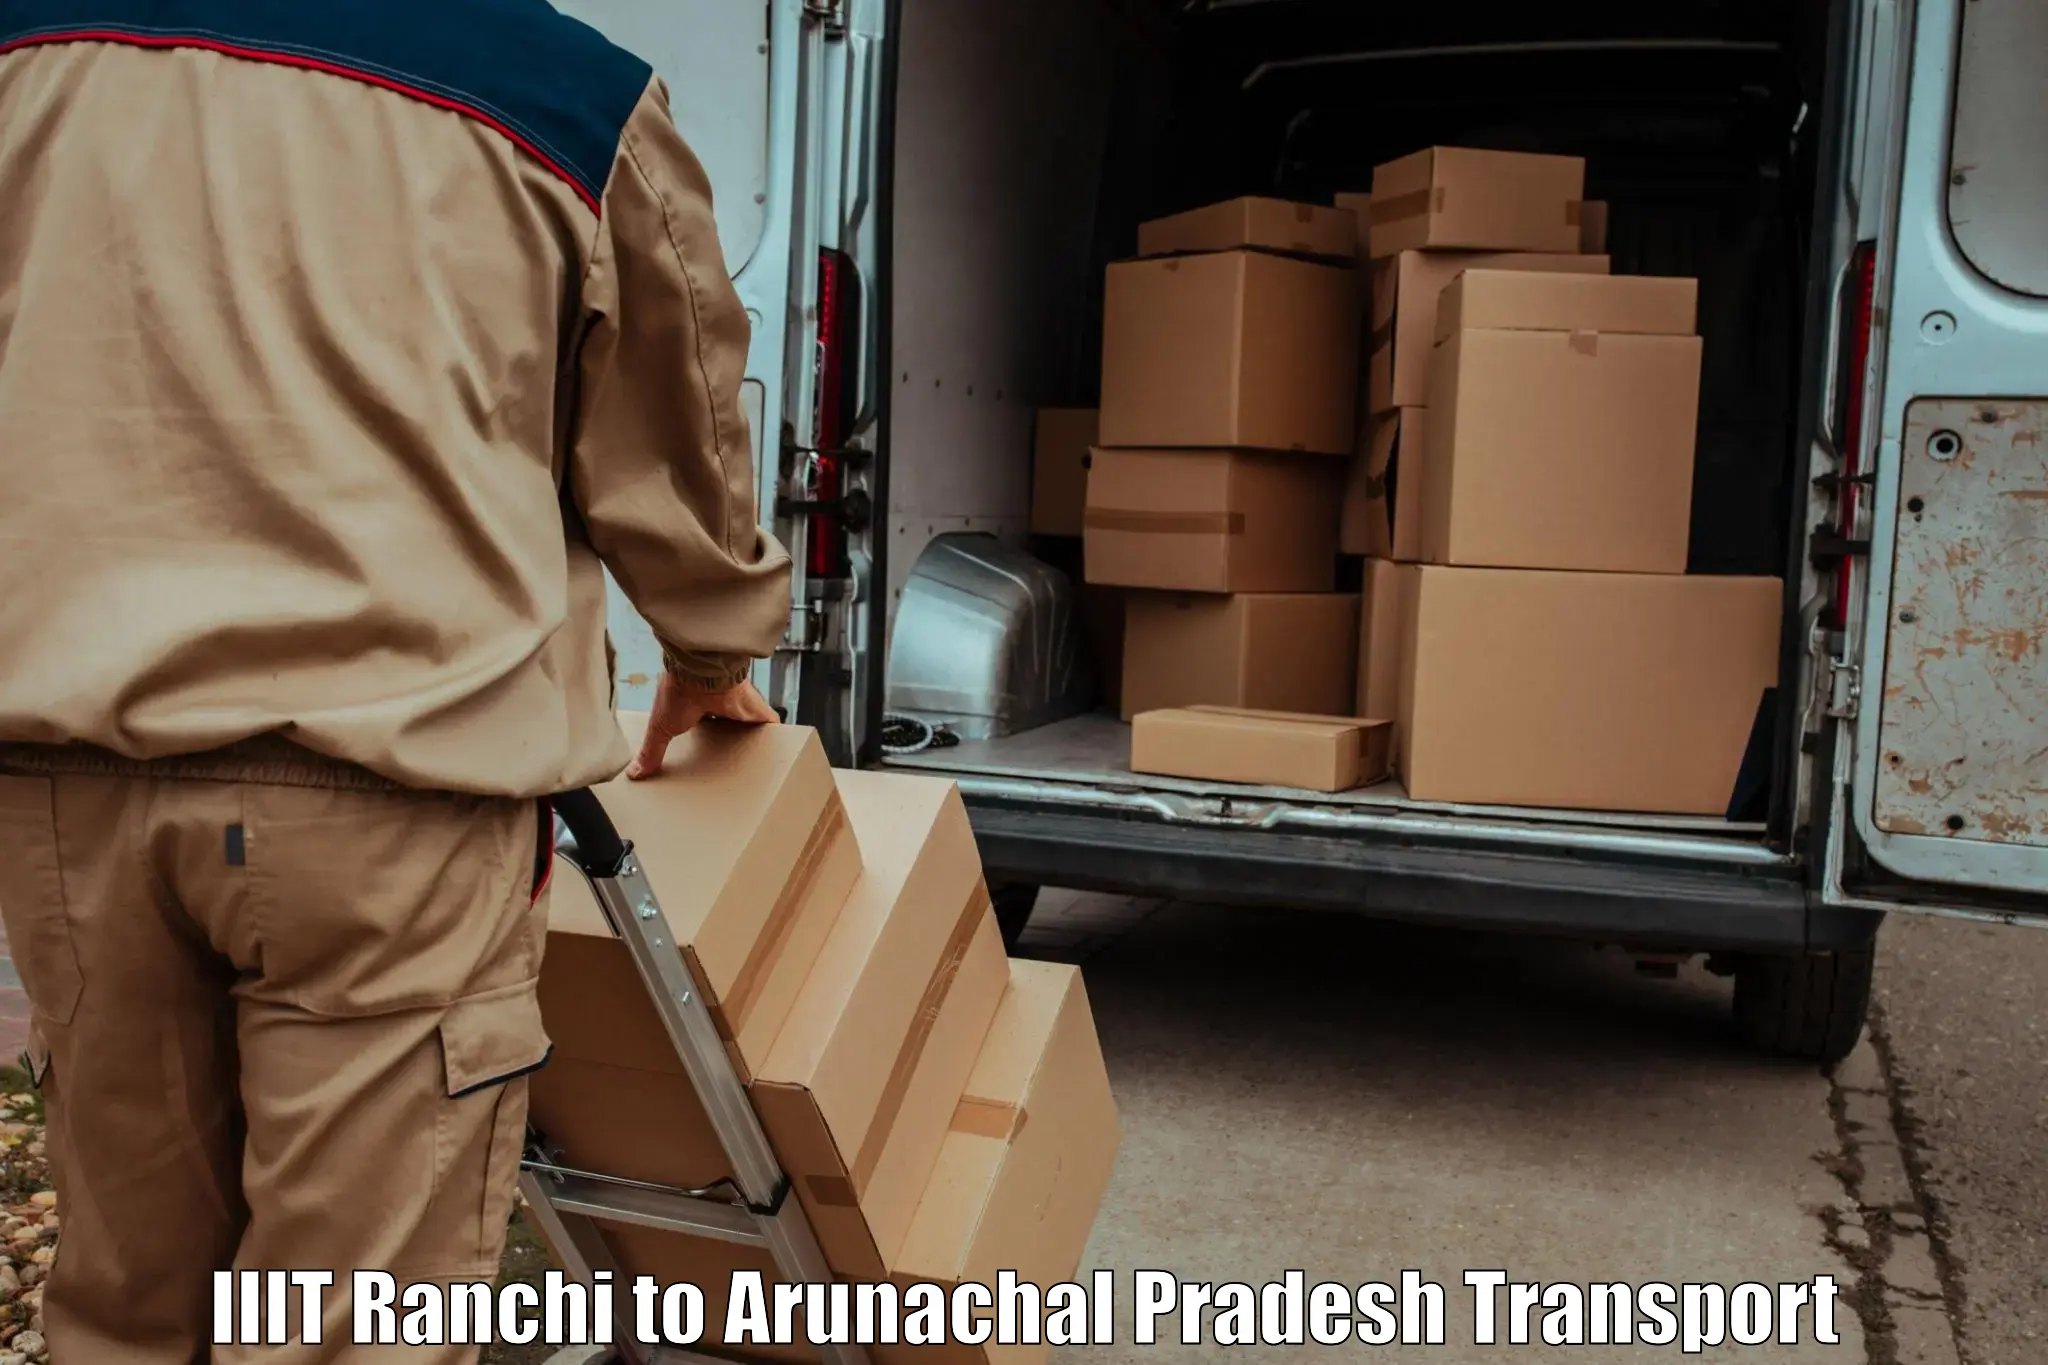 Part load transport service in India IIIT Ranchi to Deomali